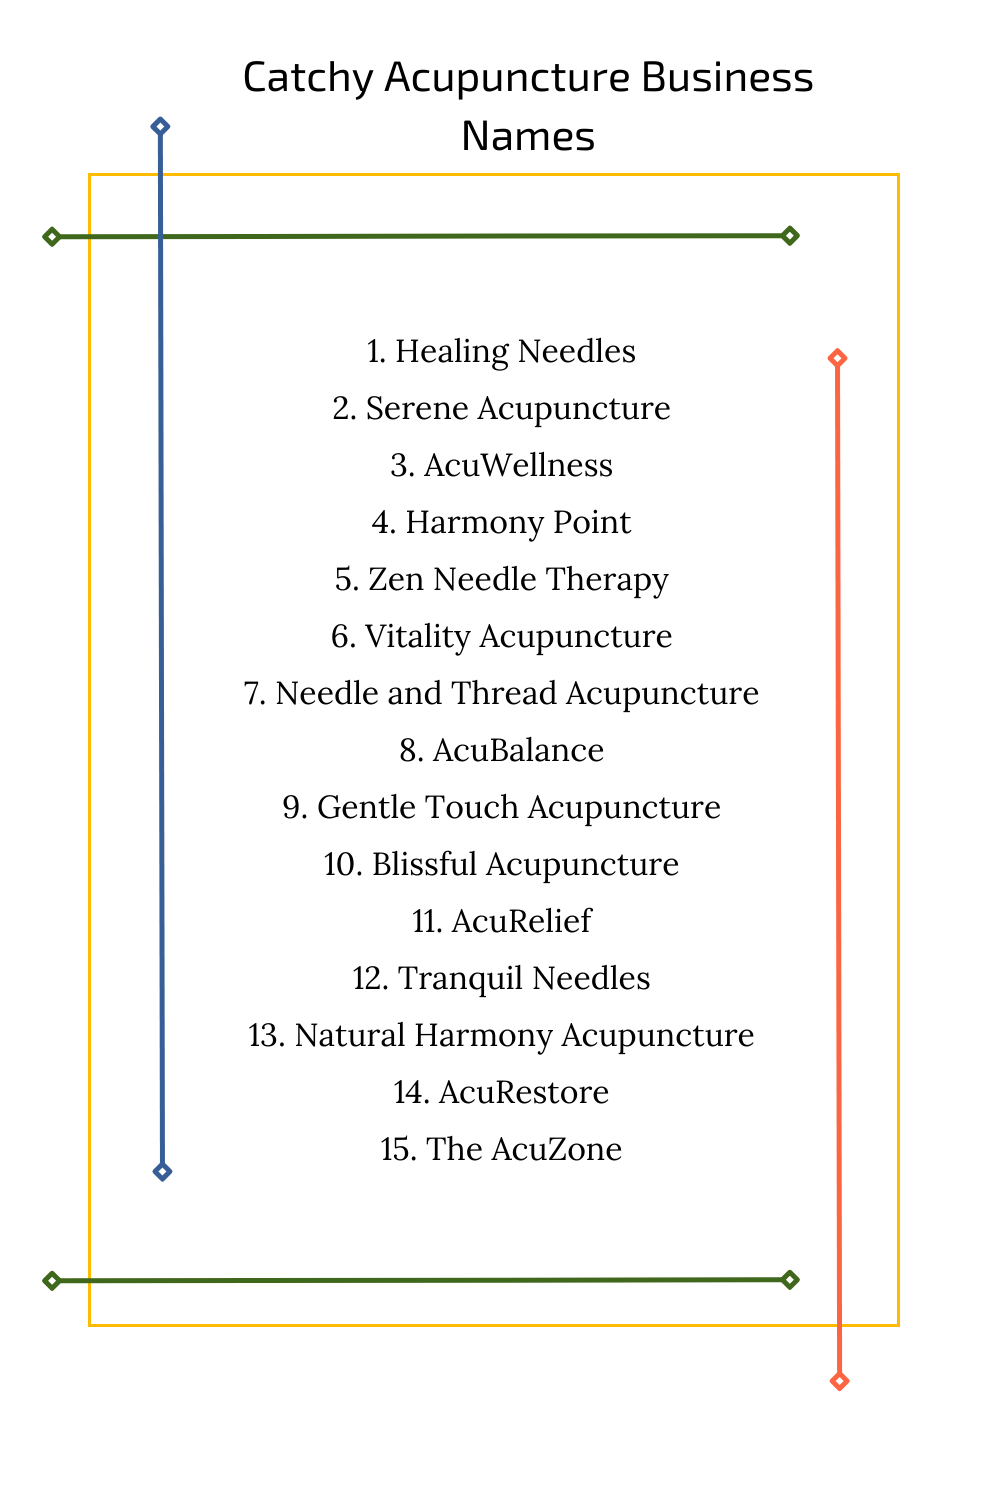 Catchy Acupuncture Business Names